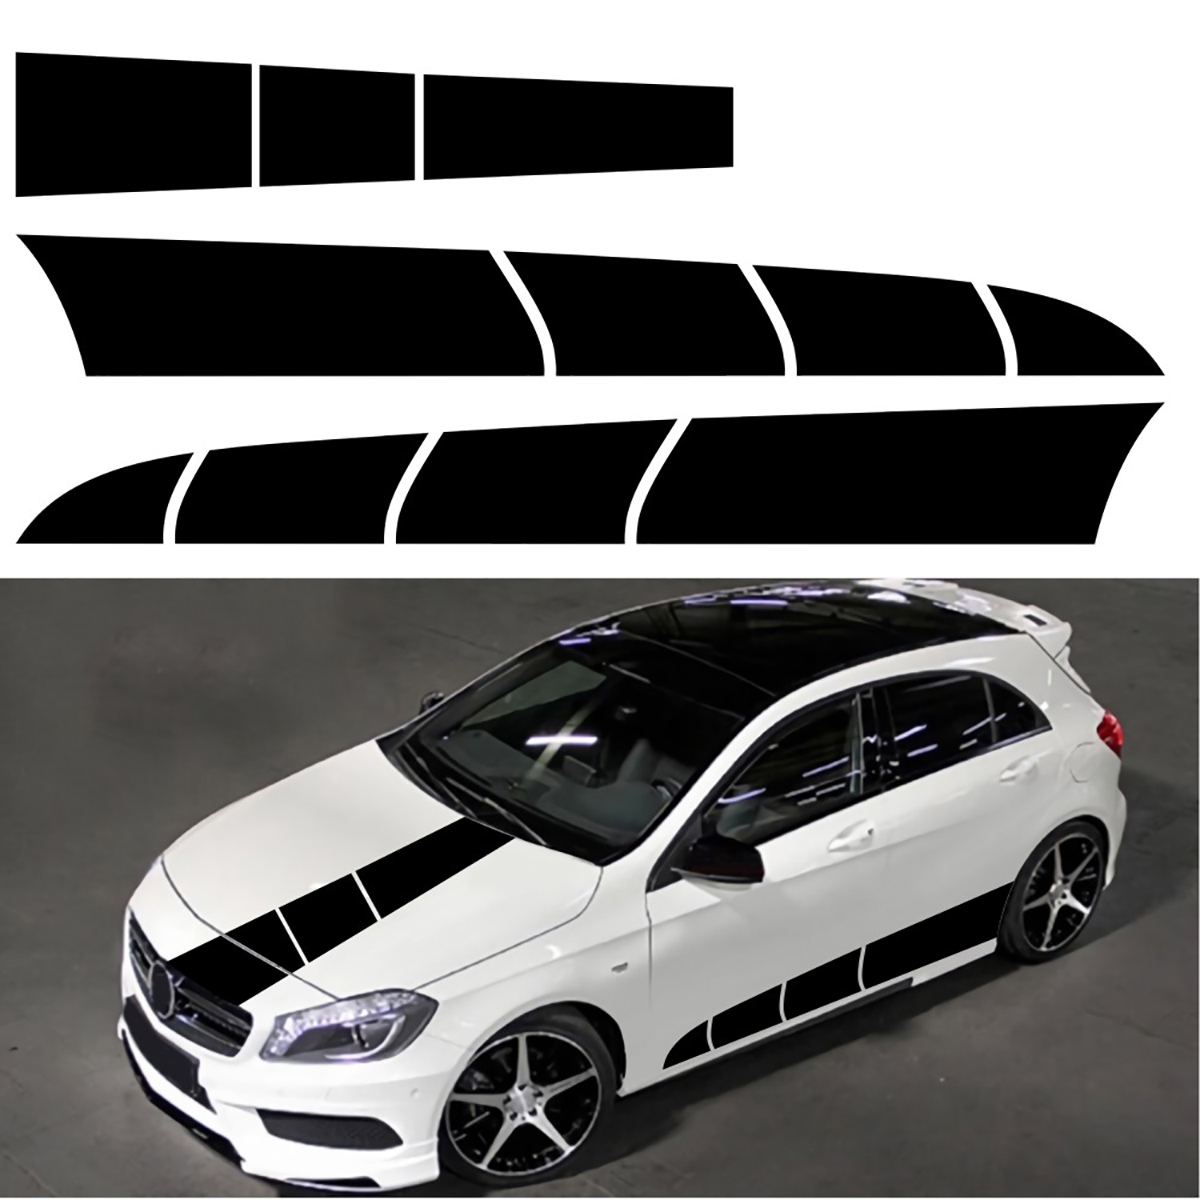 3PCS Side Body Stickers Racing Long Stripes Hood Roof Decals Decor for Car Truck